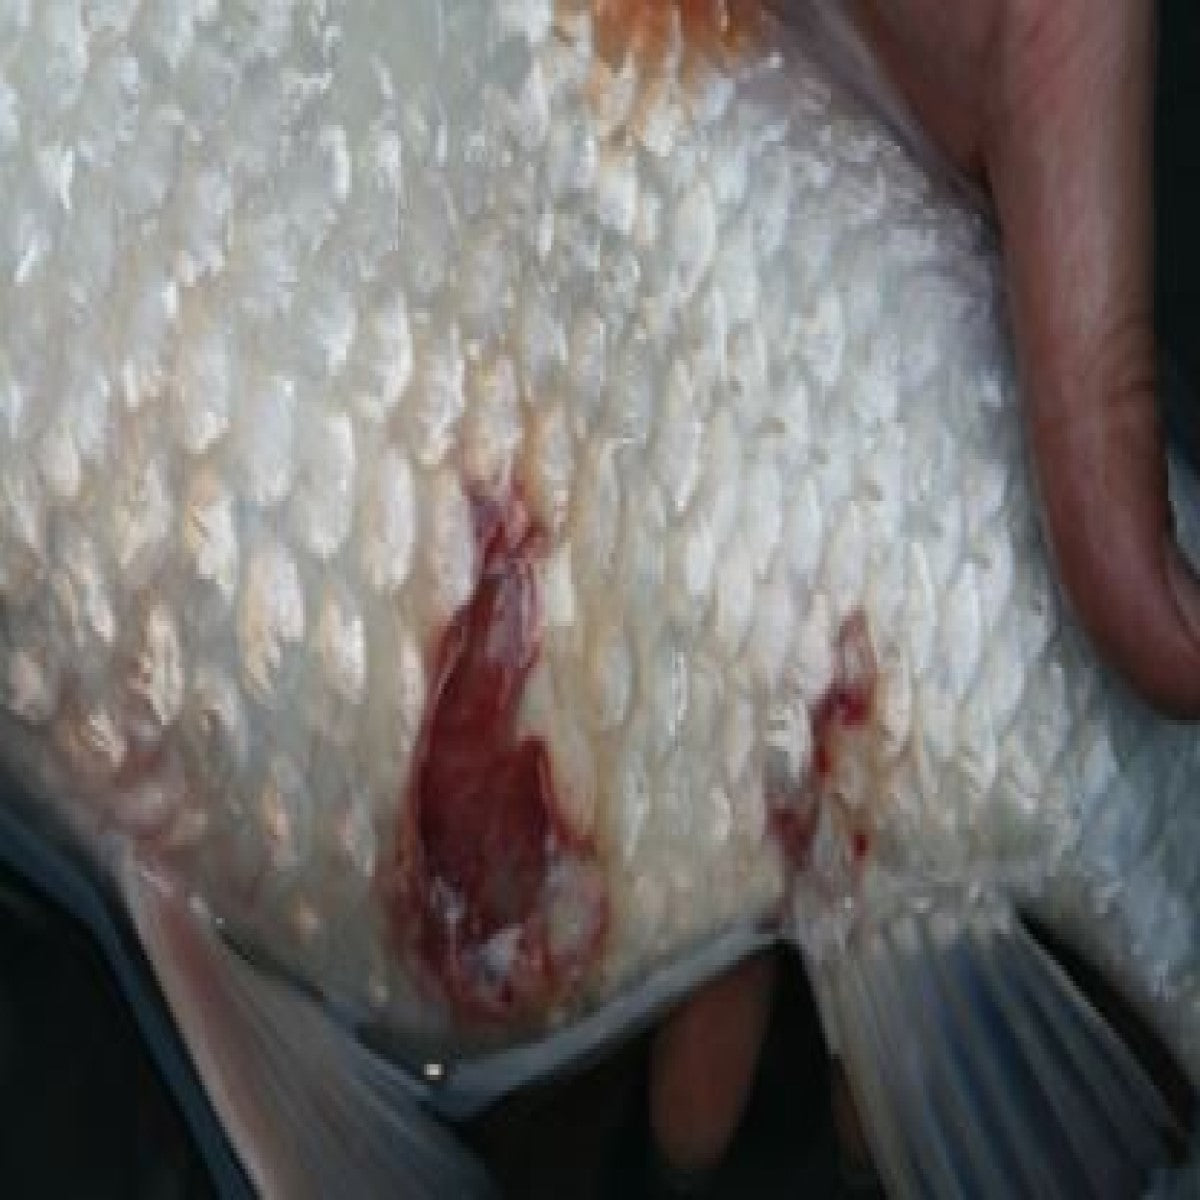 Bacterial infections in Koi.